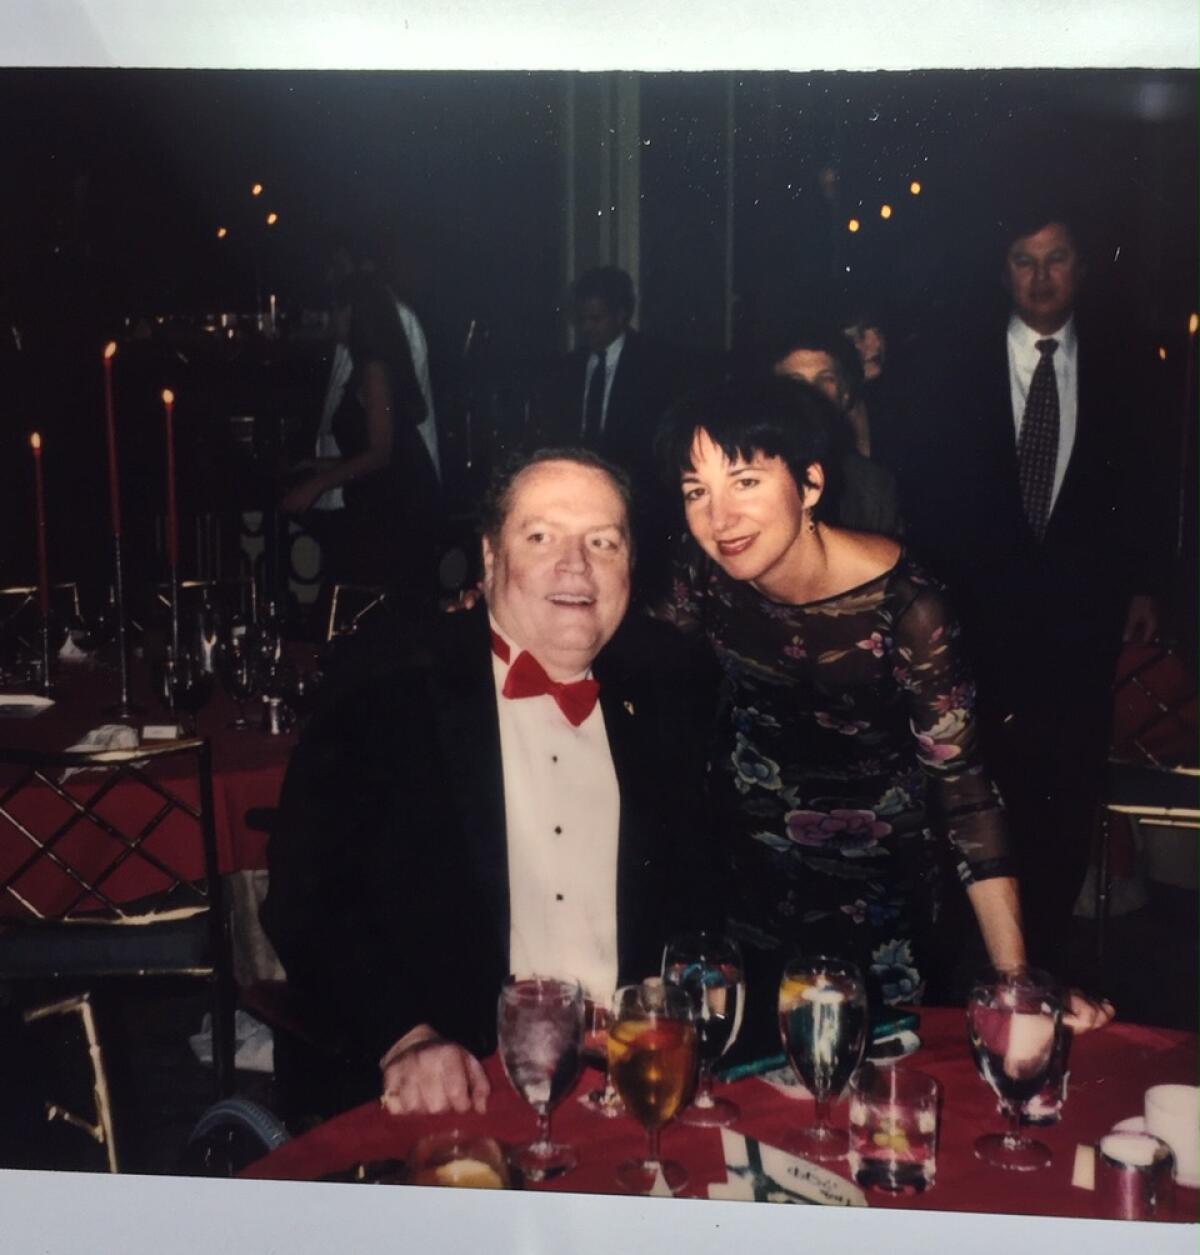 A photograph of a Polaroid picturing Larry Flynt and Kim Dower.